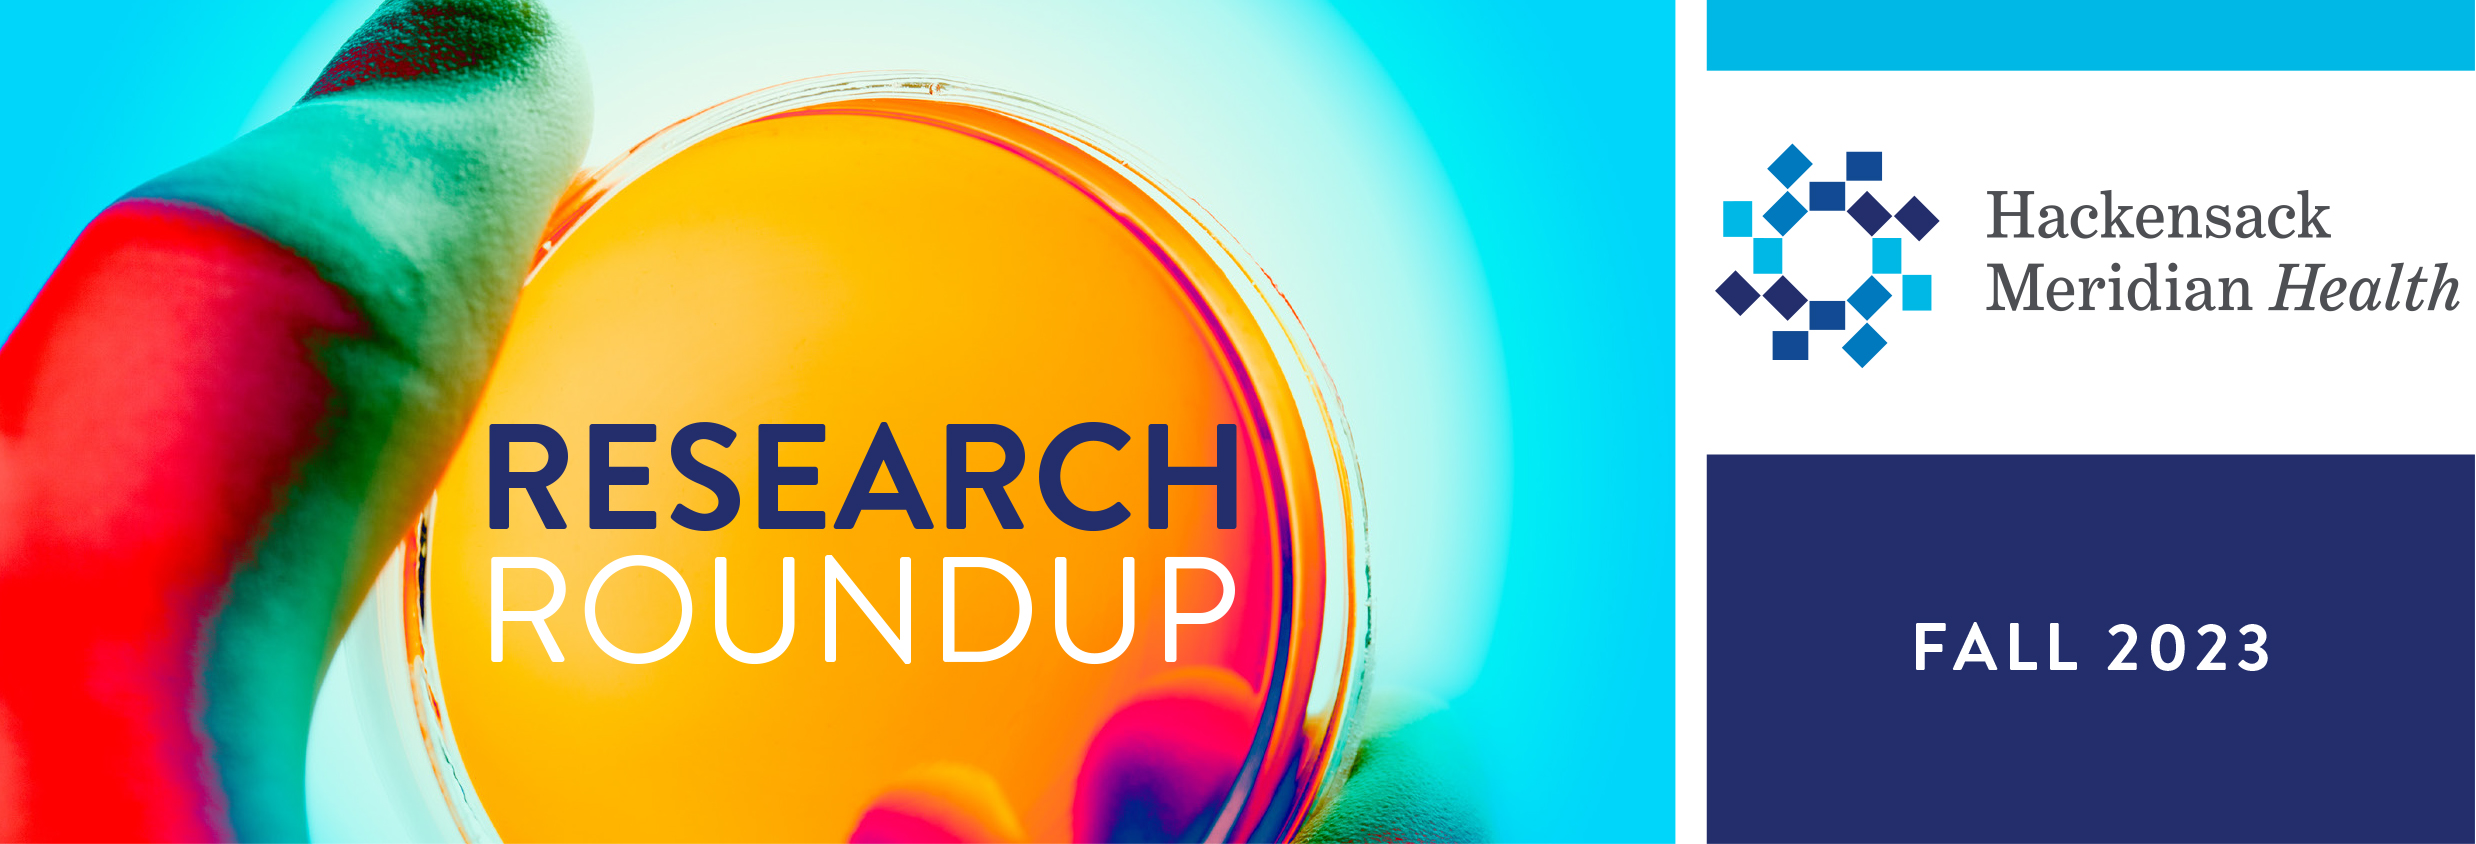 Winter Research Roundup Banner 2023 Image 